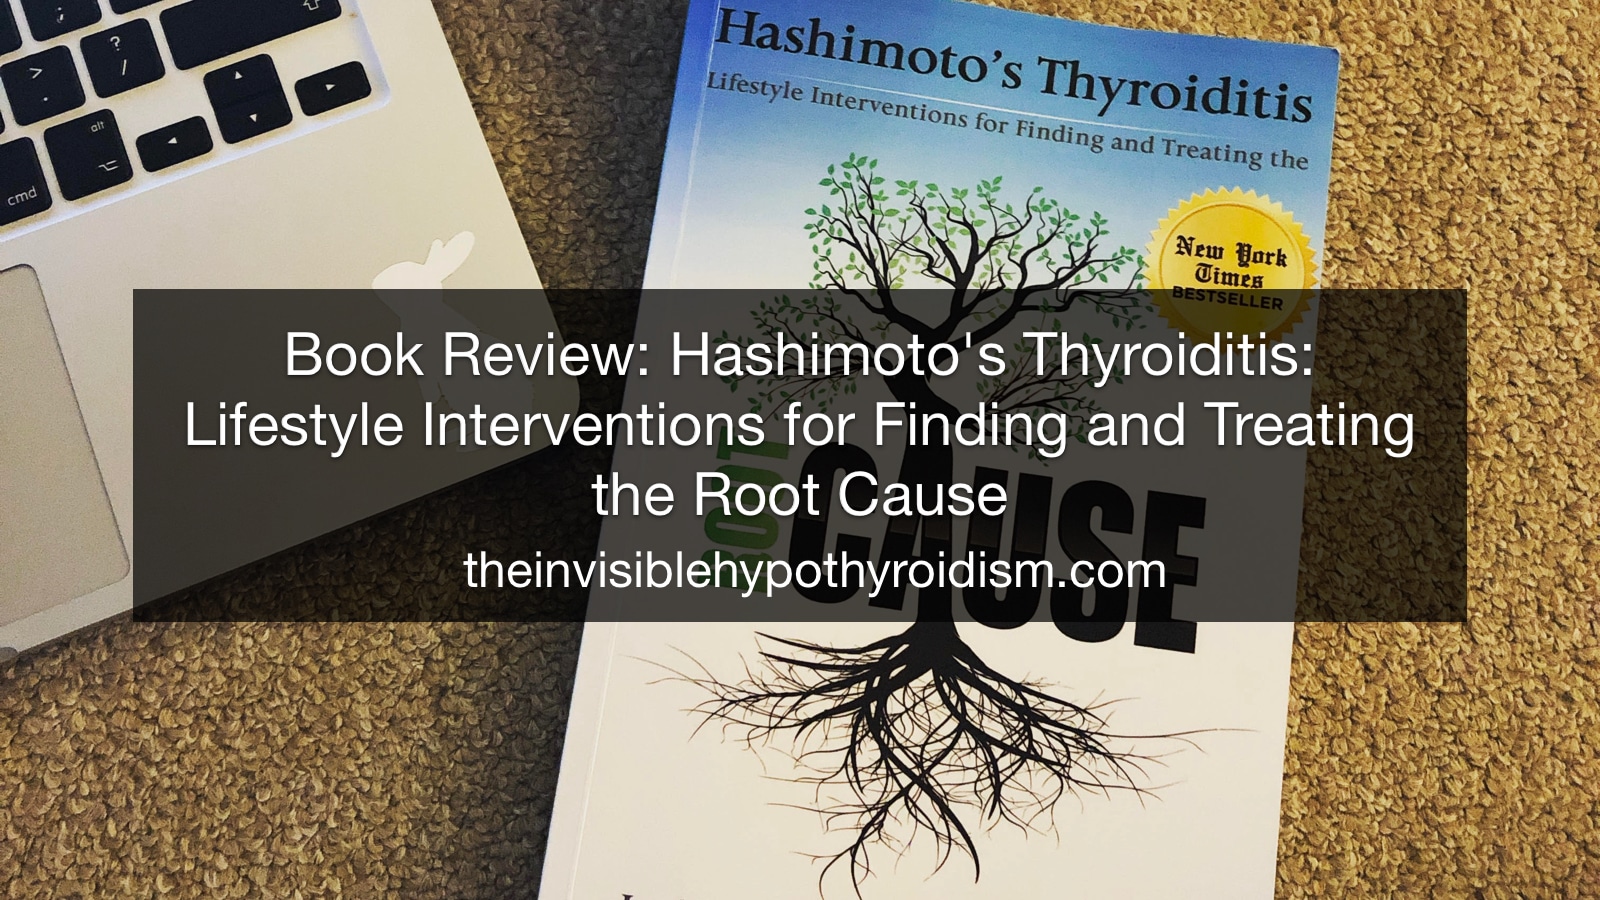 Book Review: Hashimoto's Thyroiditis: Lifestyle Interventions for Finding and Treating the Root Cause